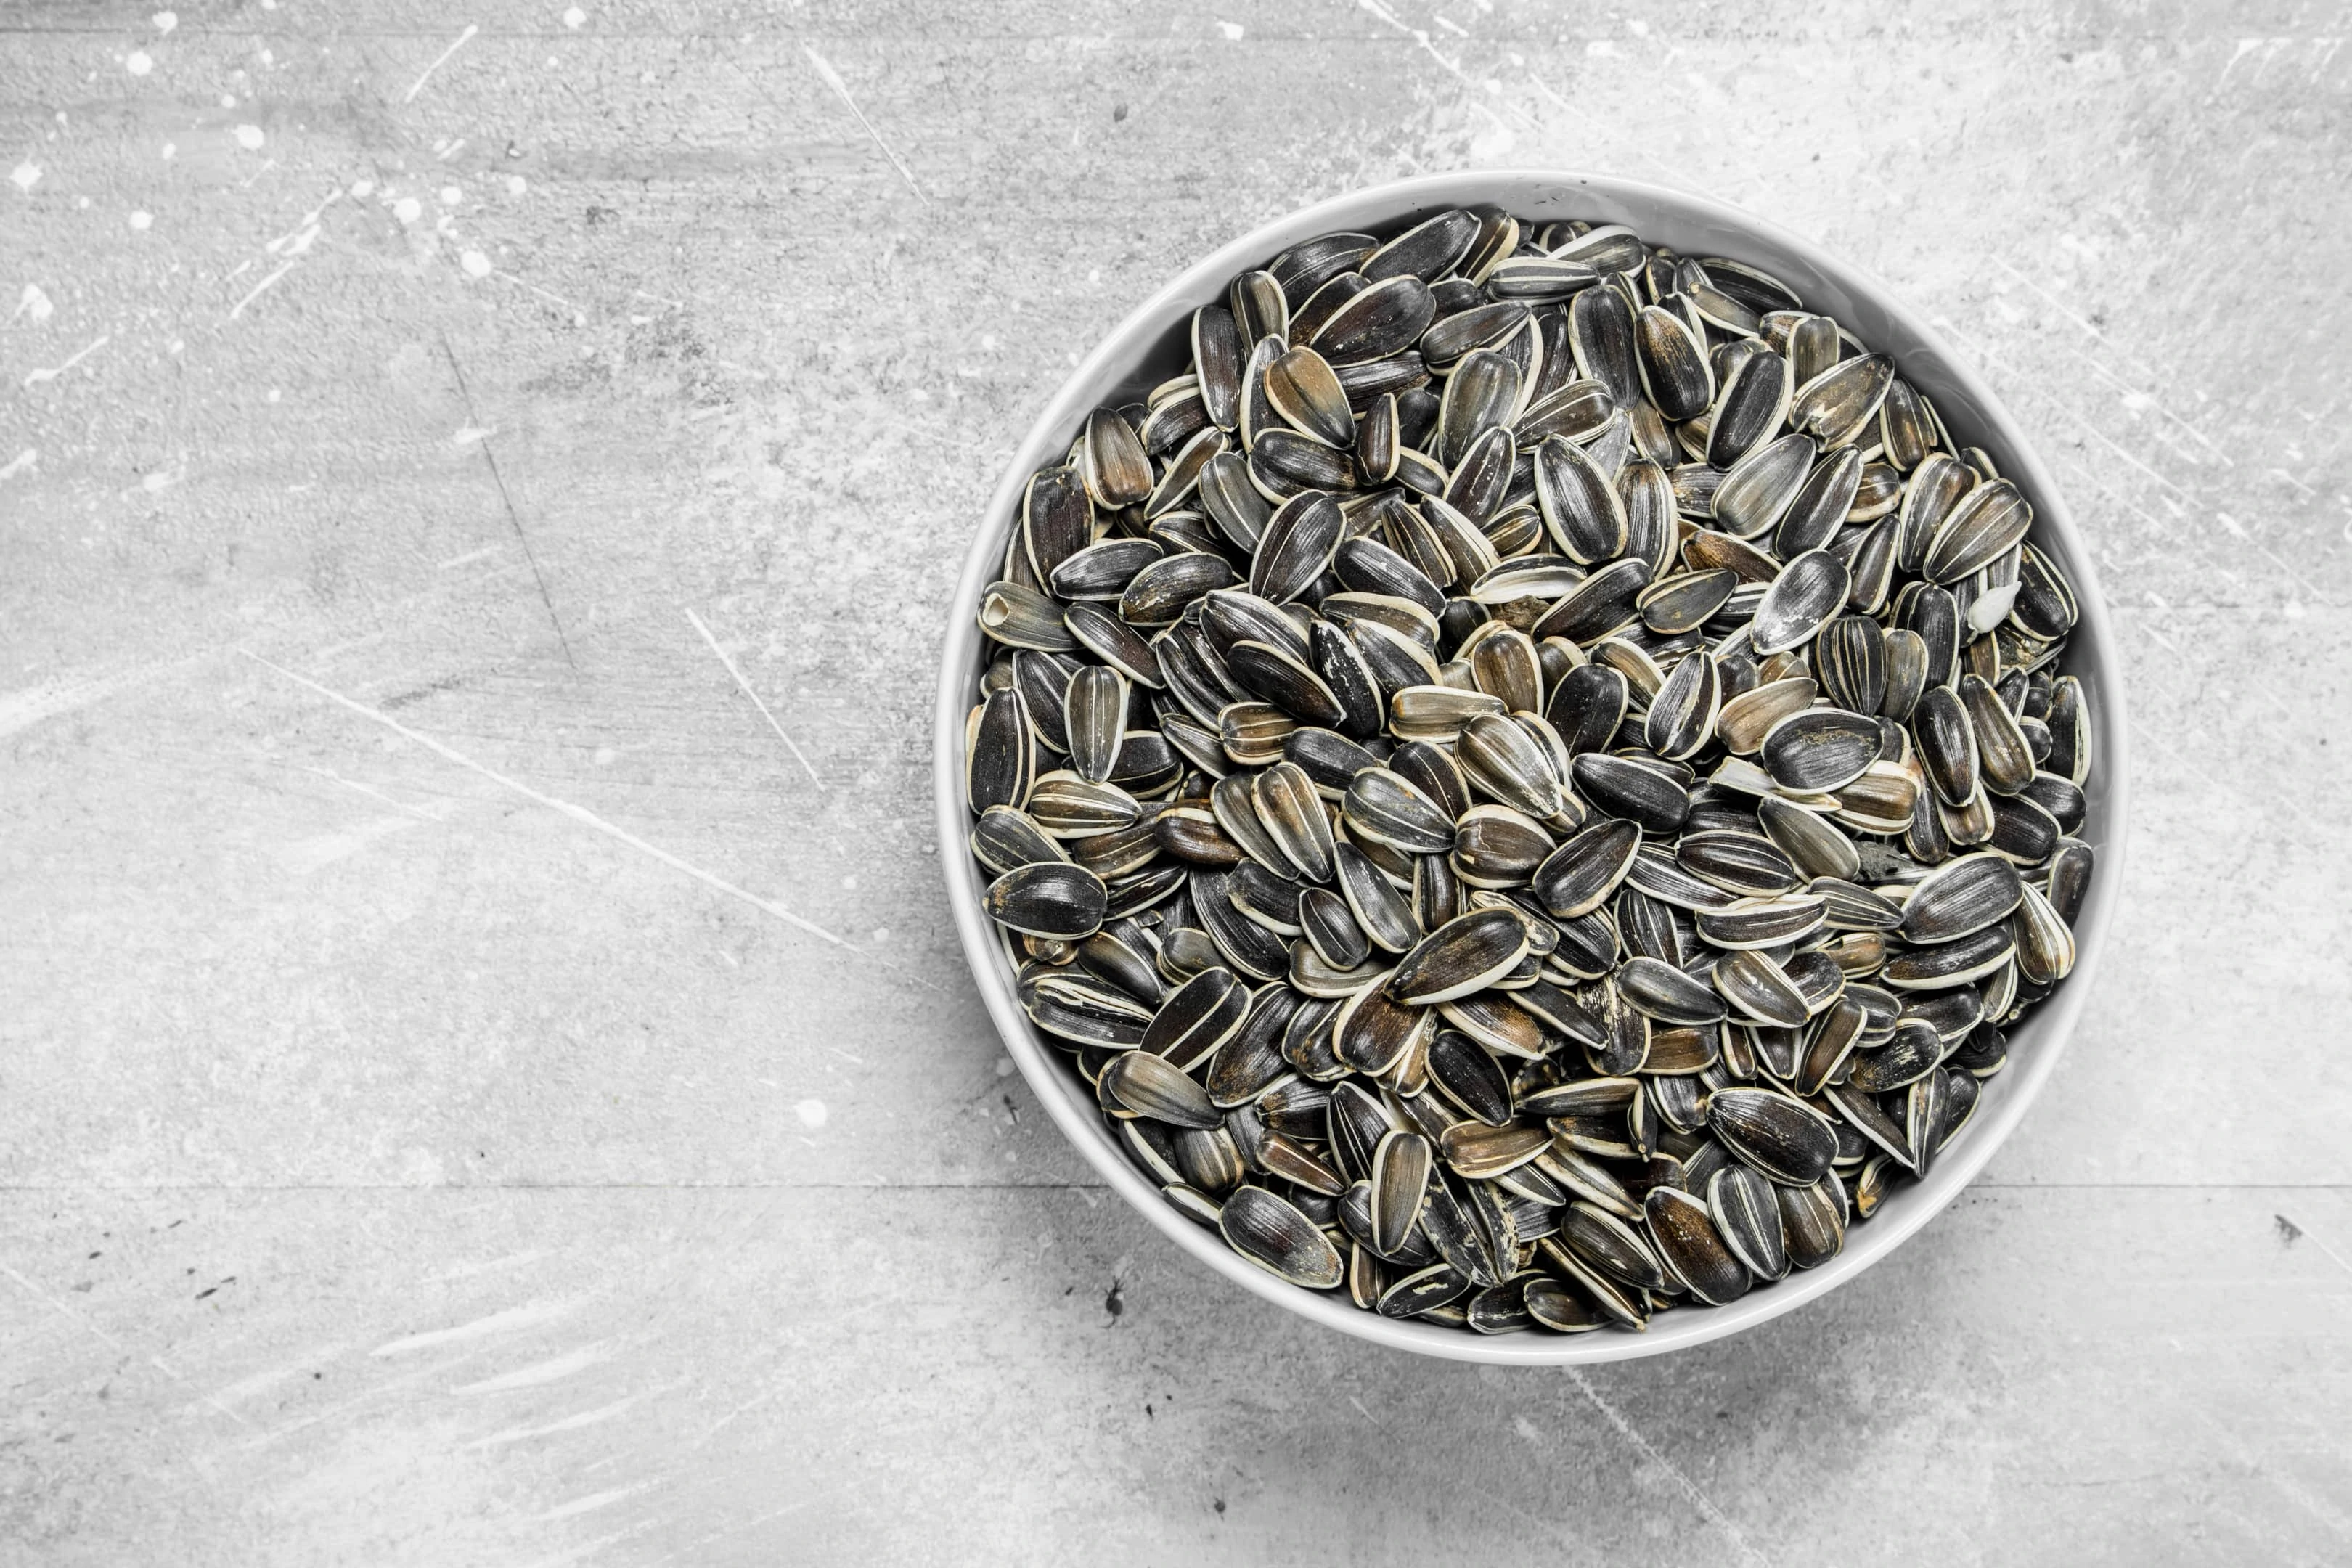 Are sunflower seeds good for you? Yes, here are some fresh sunflower seeds